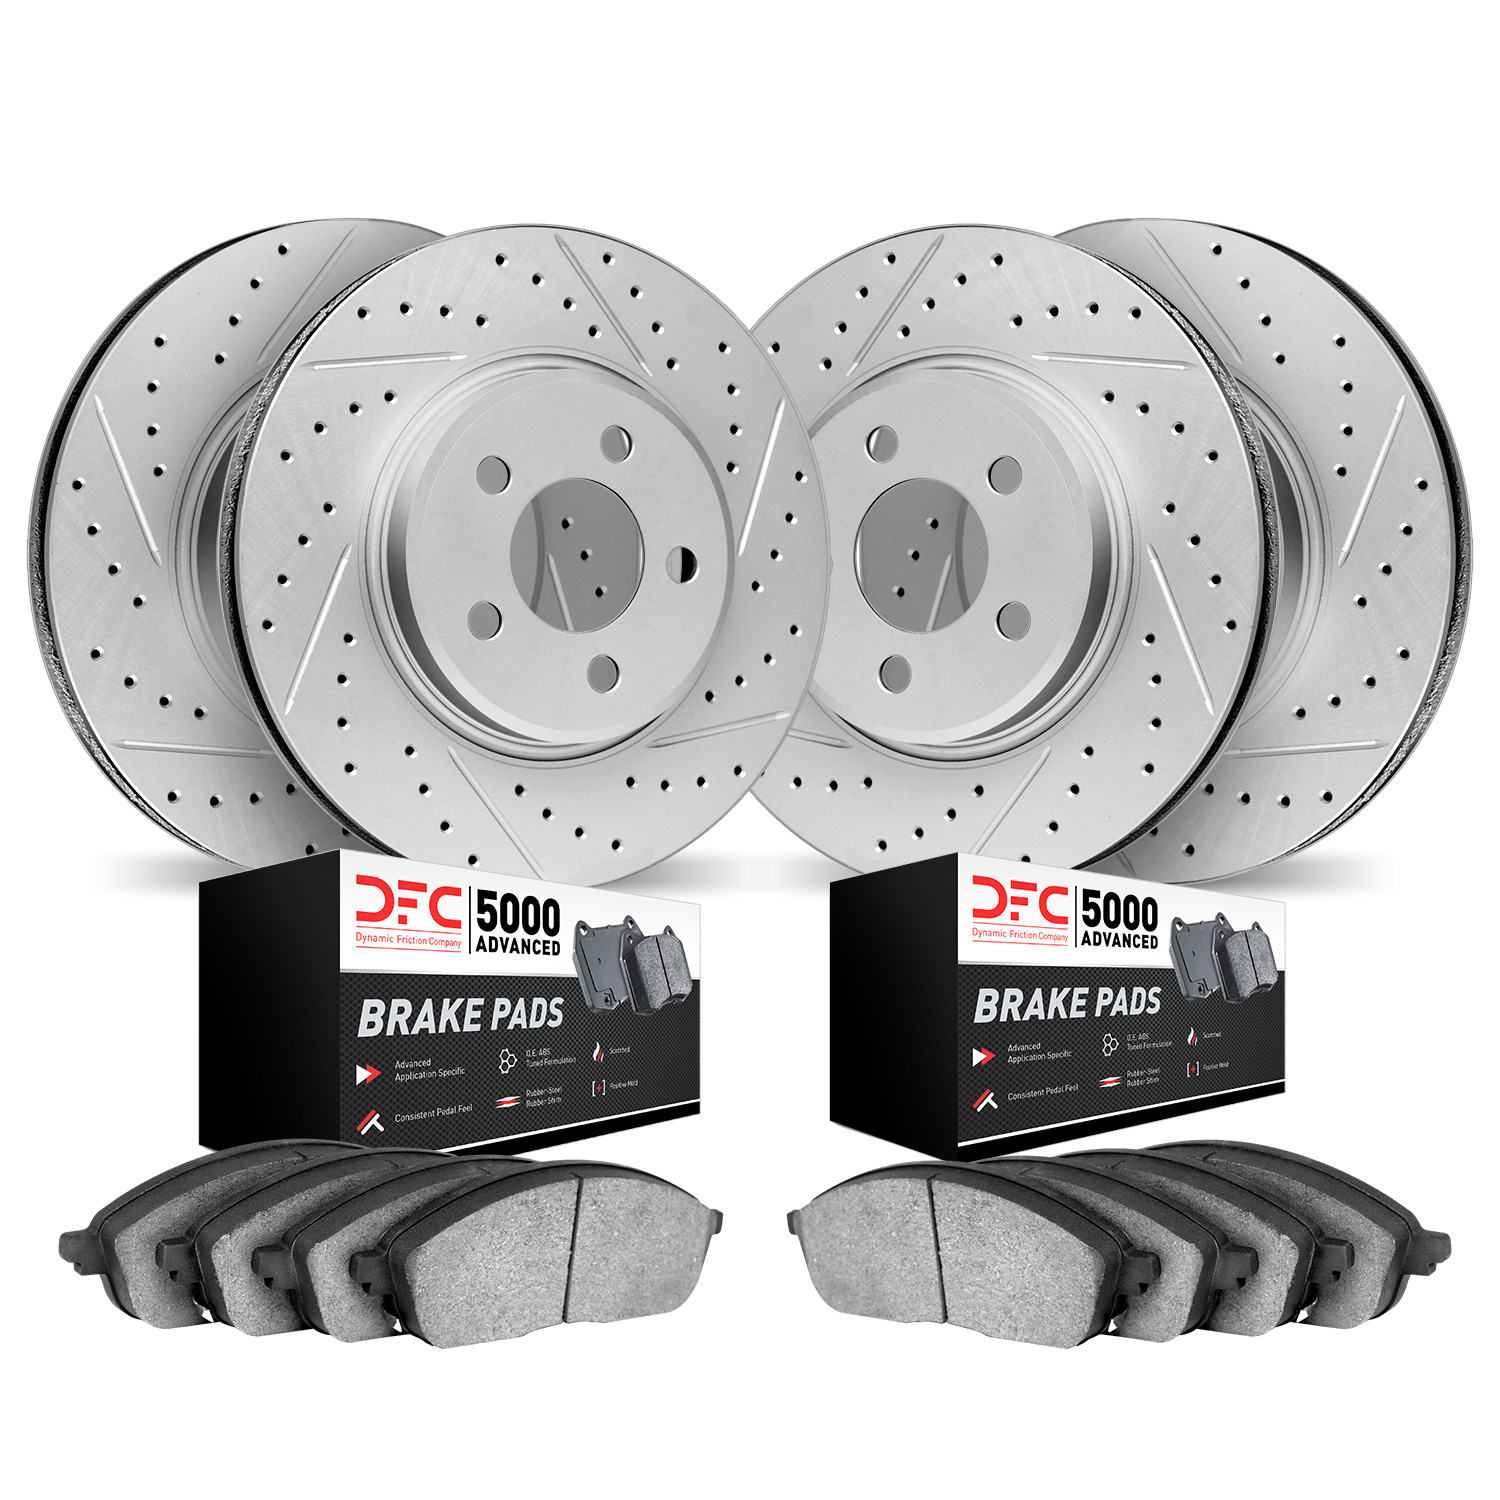 2504-13007 Geoperformance Drilled/Slotted Rotors w/5000 Advanced Brake Pads Kit, 2008-2020 Subaru, Position: Front and Rear